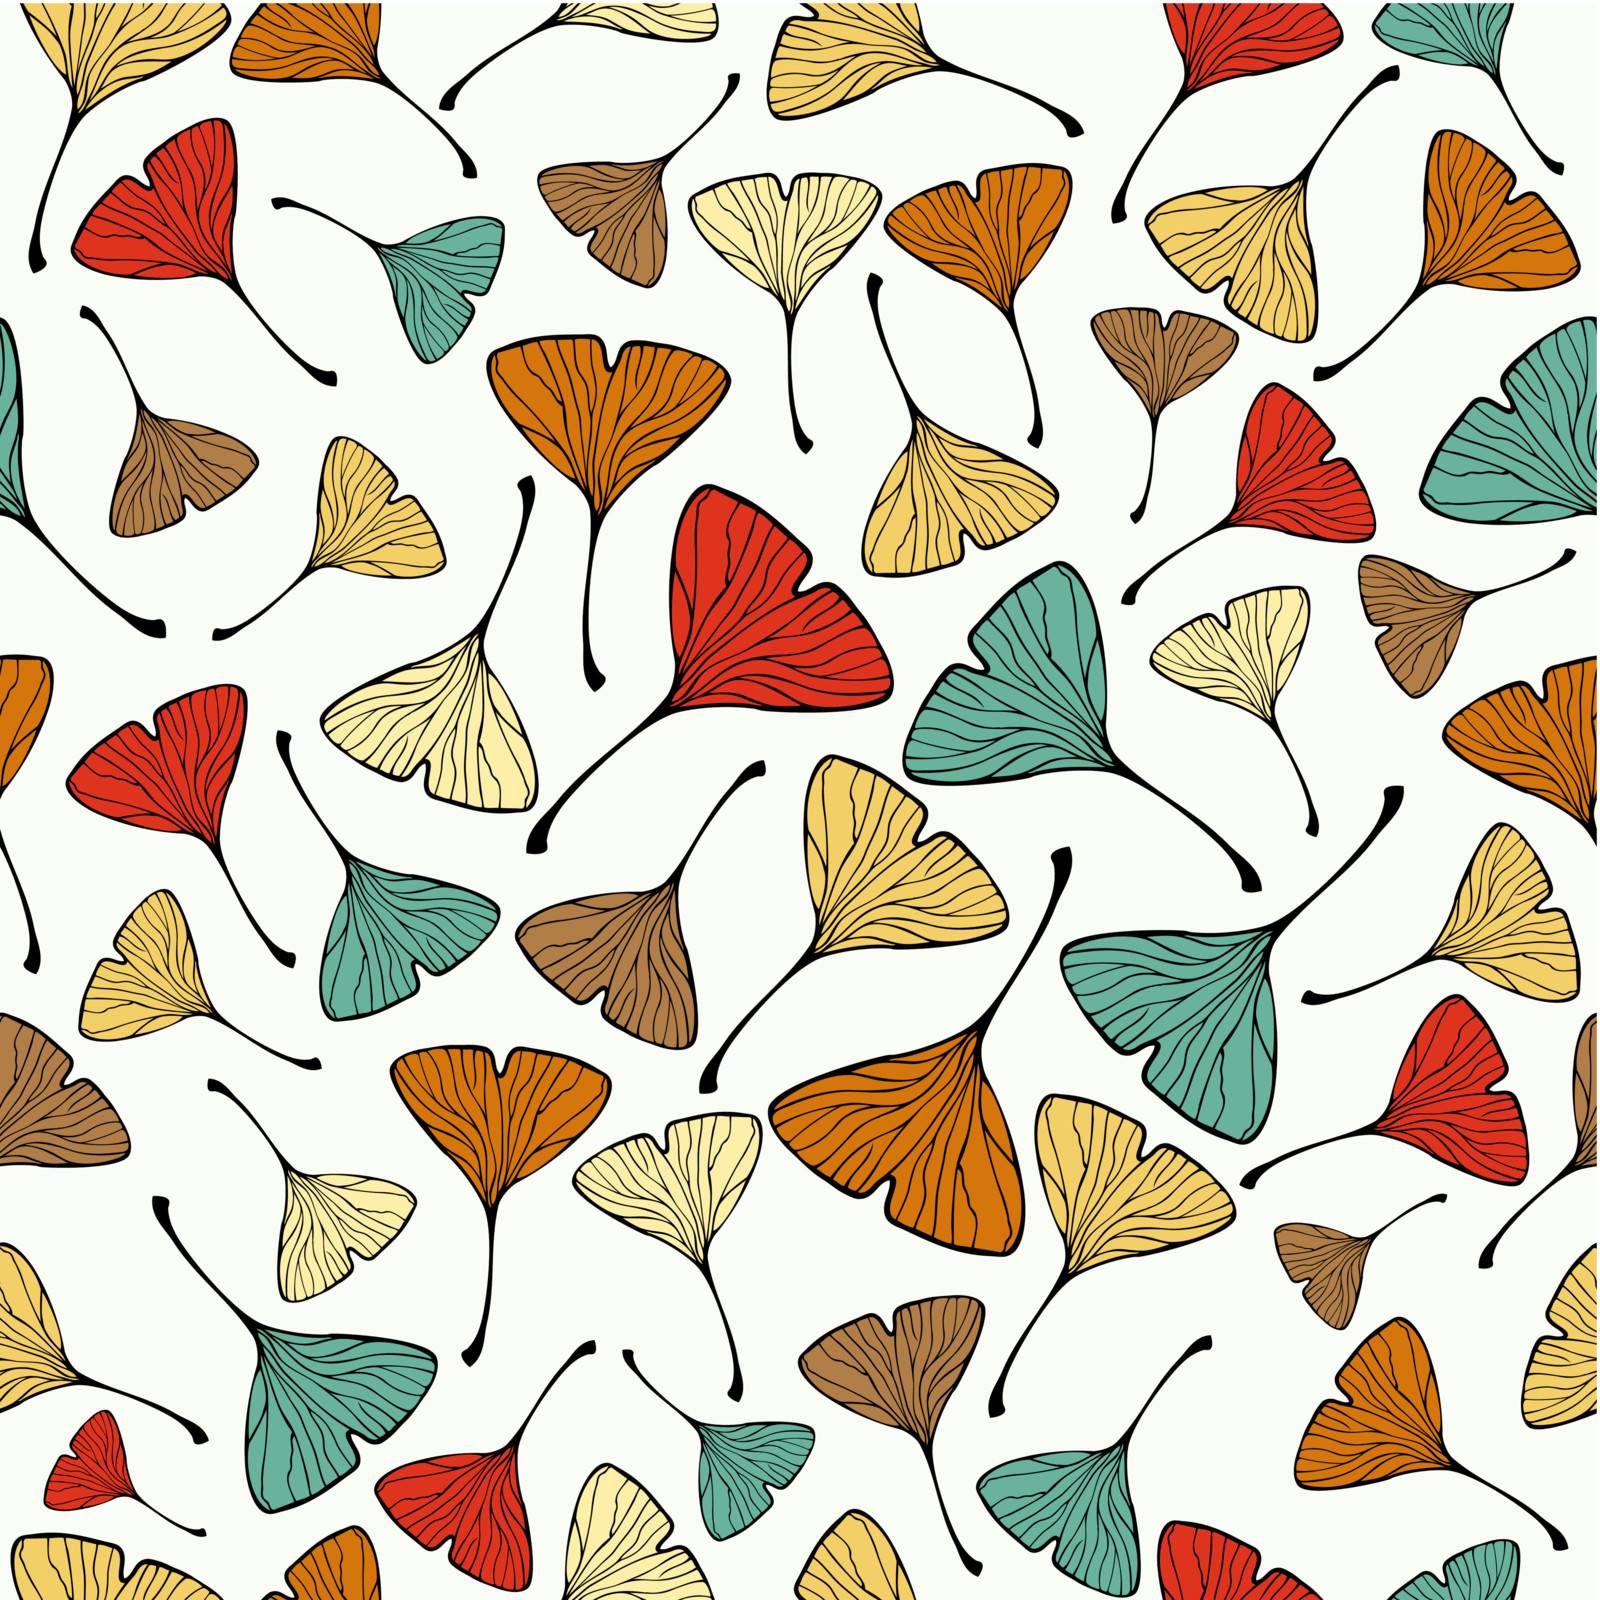 Sketch style Ginko biloba Leaf Seamless pattern background. Vector file layered for easy manipulation and custom coloring